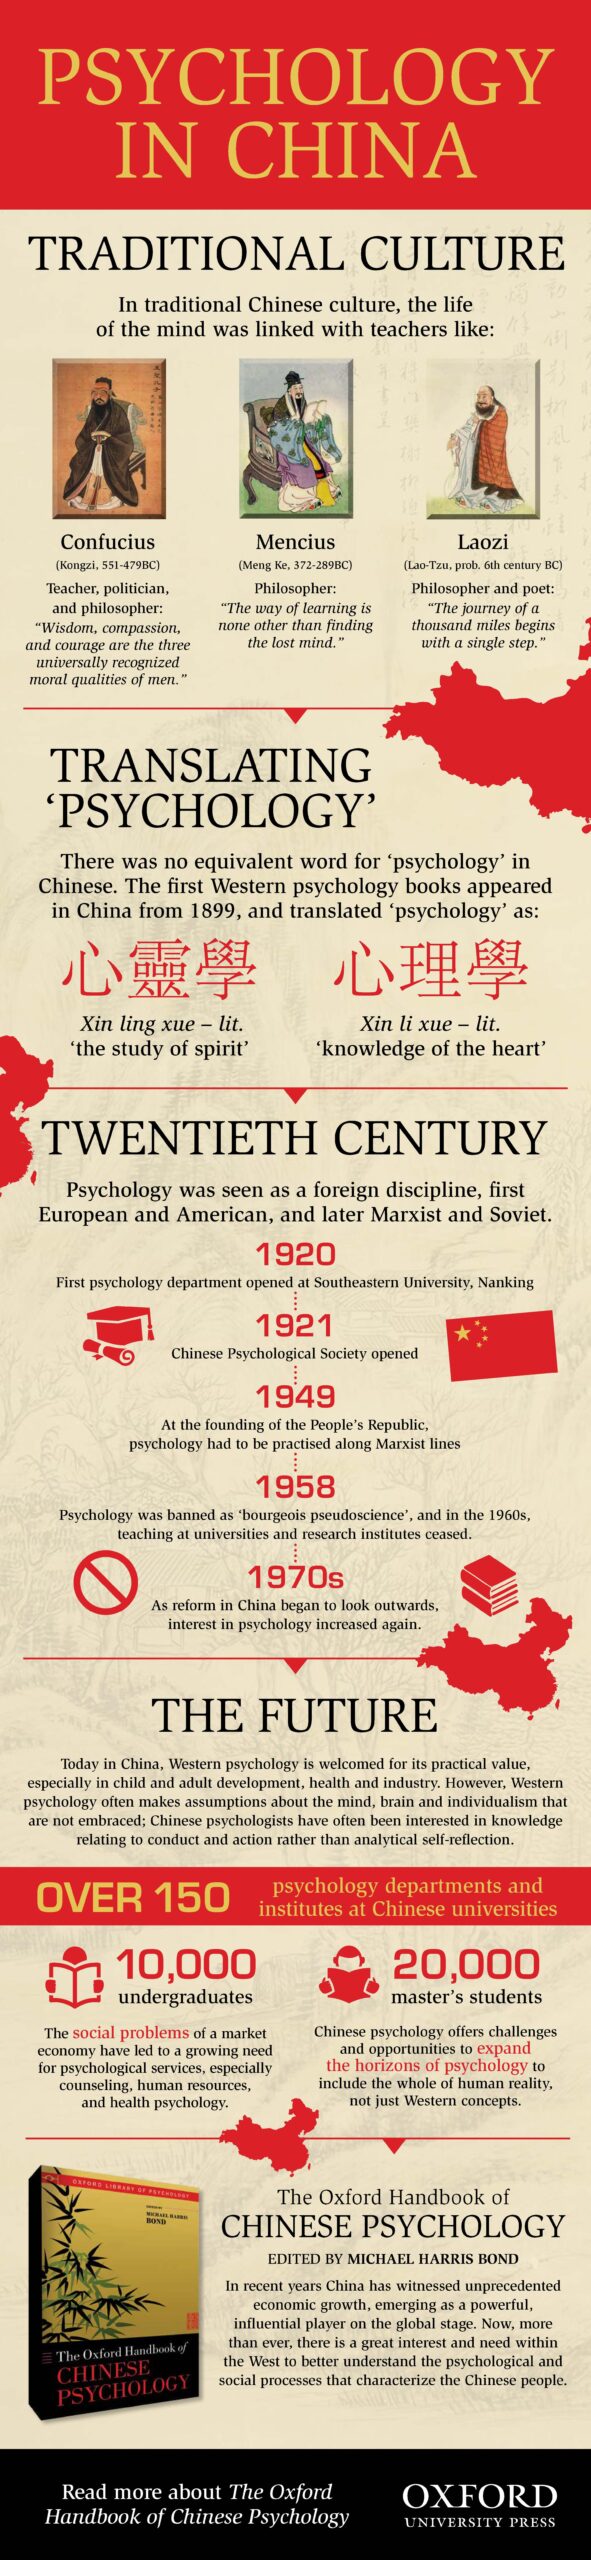 China in Numbers | Visual.ly